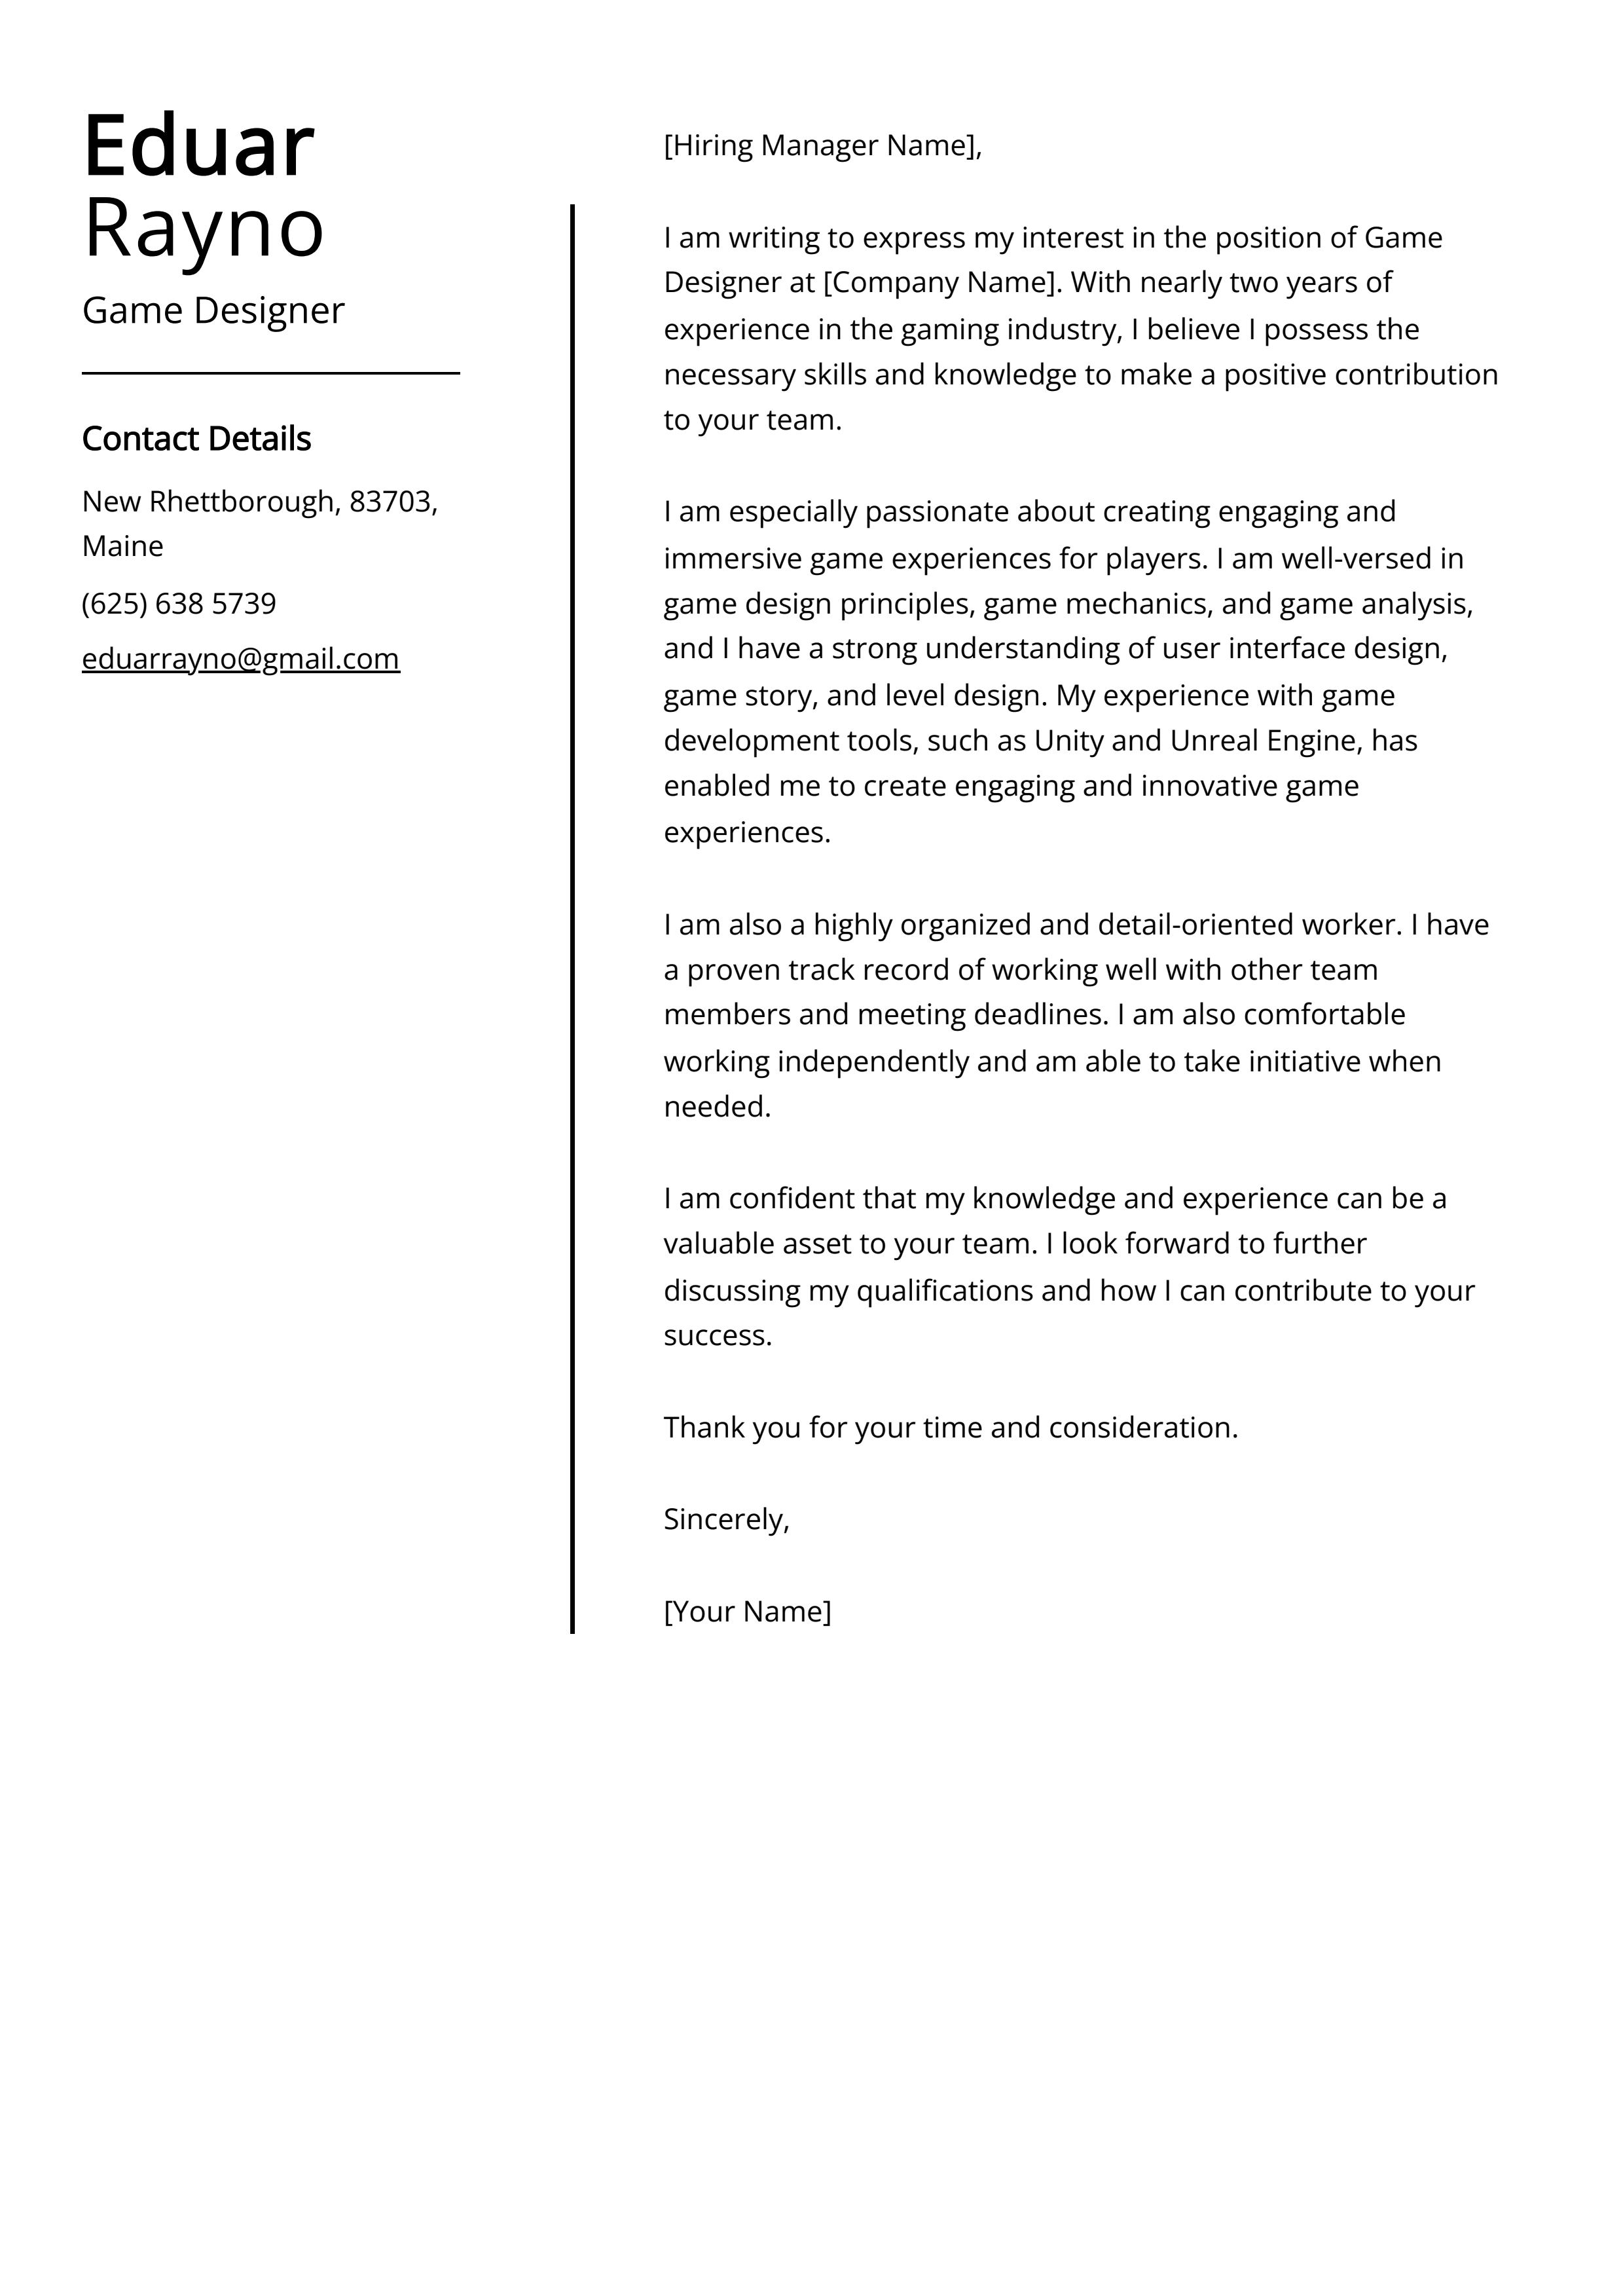 Game Designer Cover Letter Example